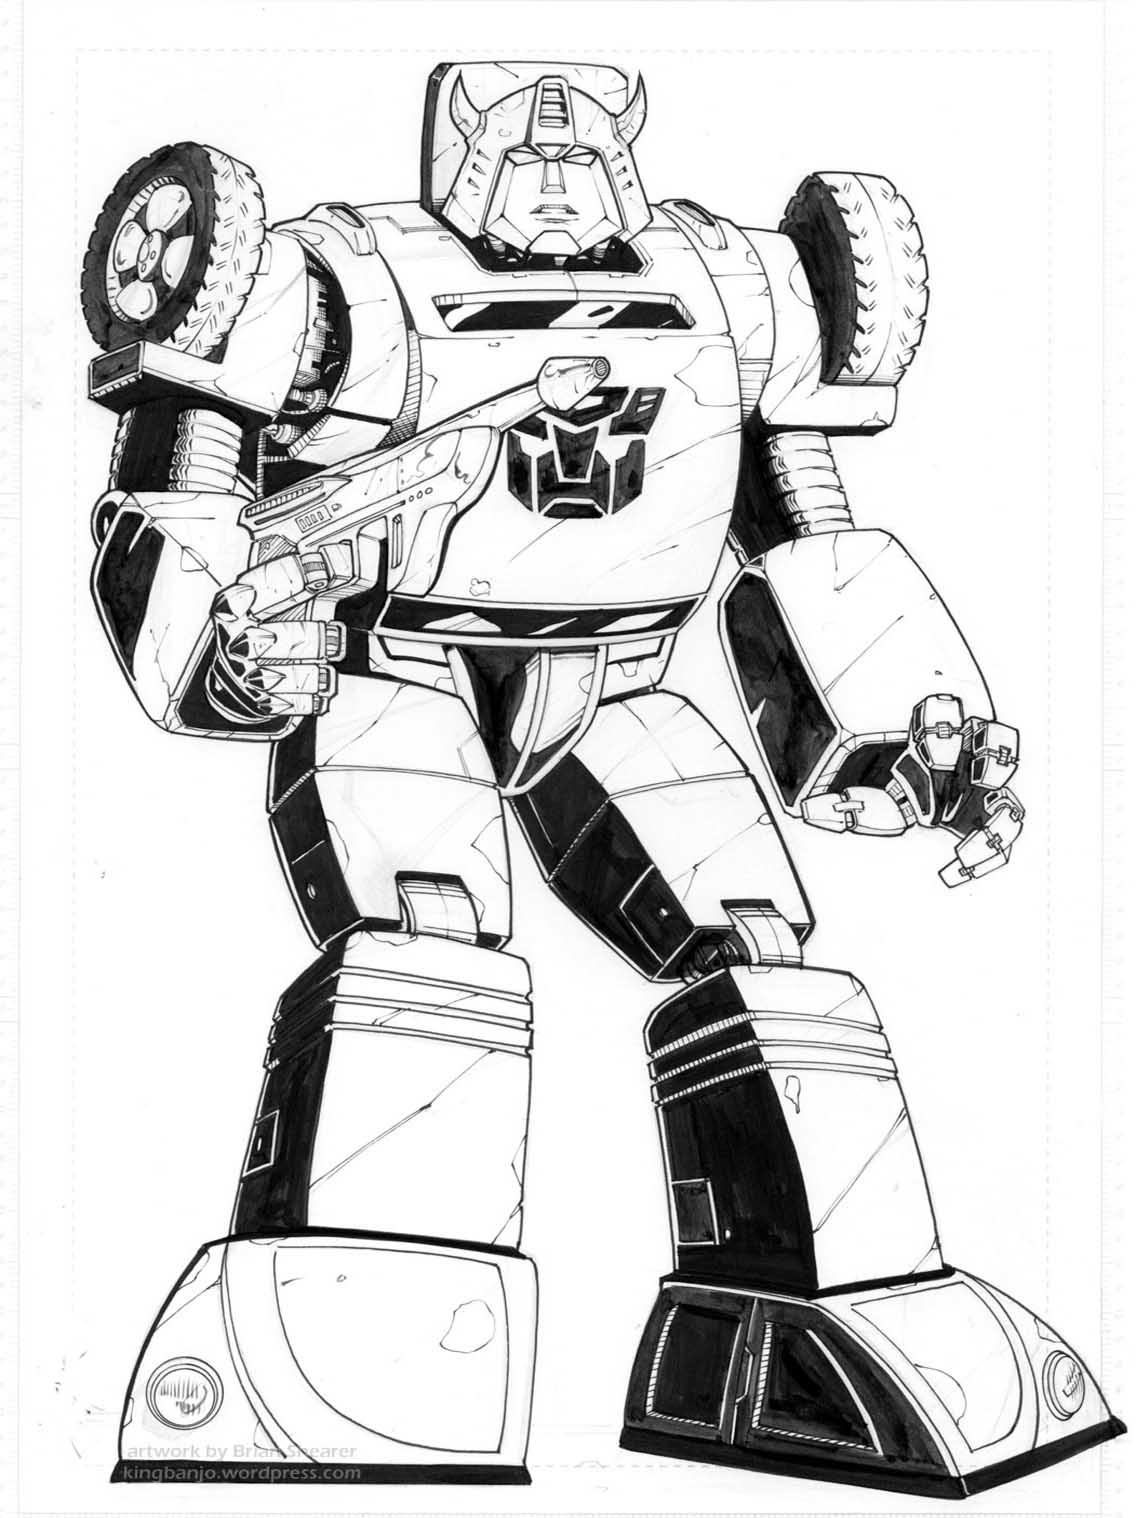 Download Transformers Lockdown Coloring Page - Free Coloring Pages Online